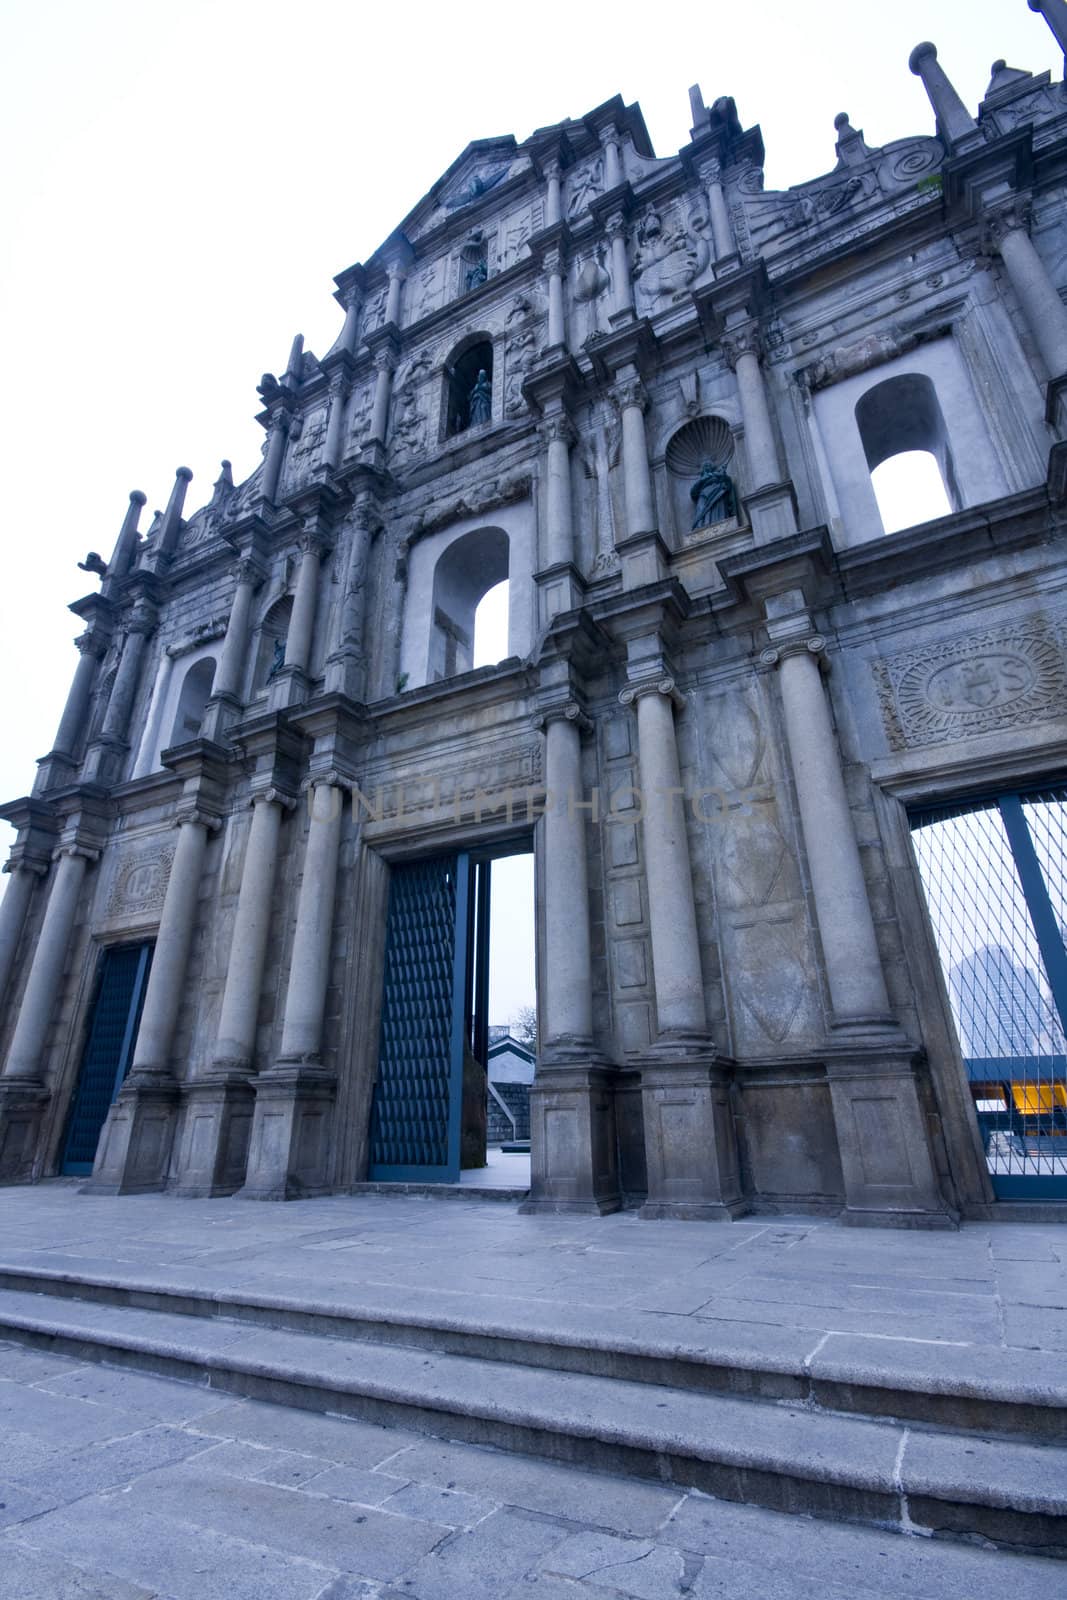  Cathedral of Saint Paul in Macao (Sao Paulo Church)
